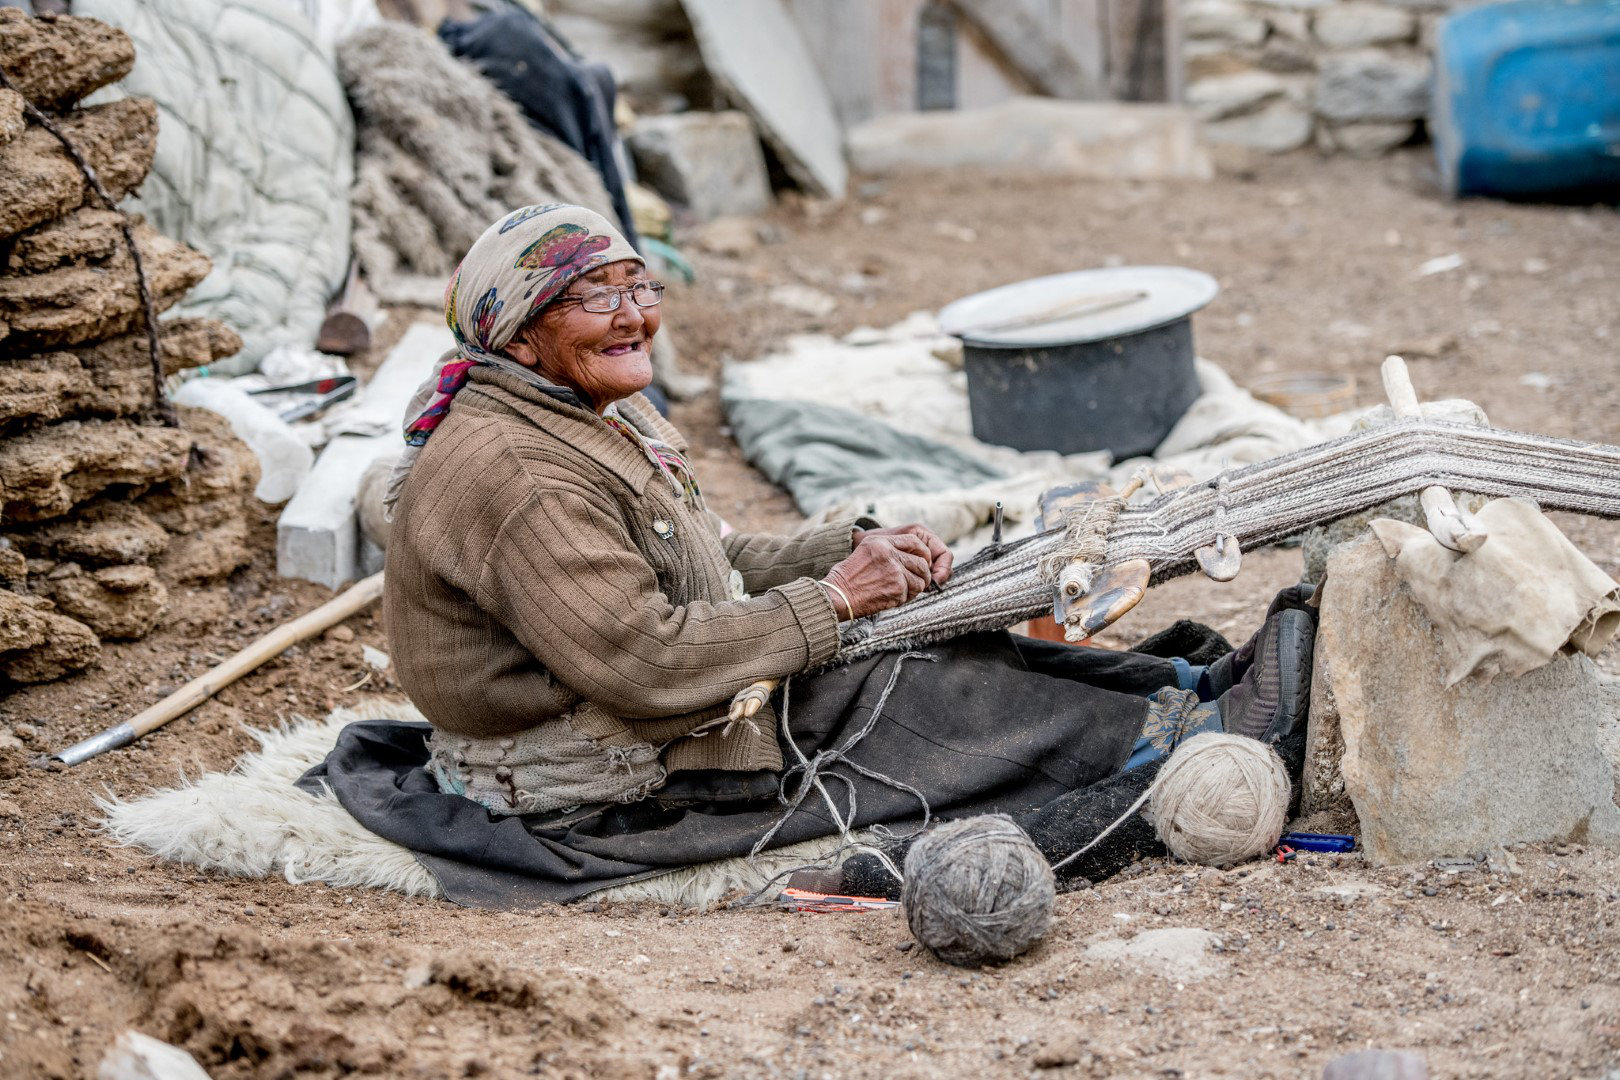 With the help of a new pair of glasses, a Ladakhi elder from the high altitude Changthang Plateau of Tibet, weaves a rug with wool from her hundreds of Pashmina goats. She smiles at the camera.